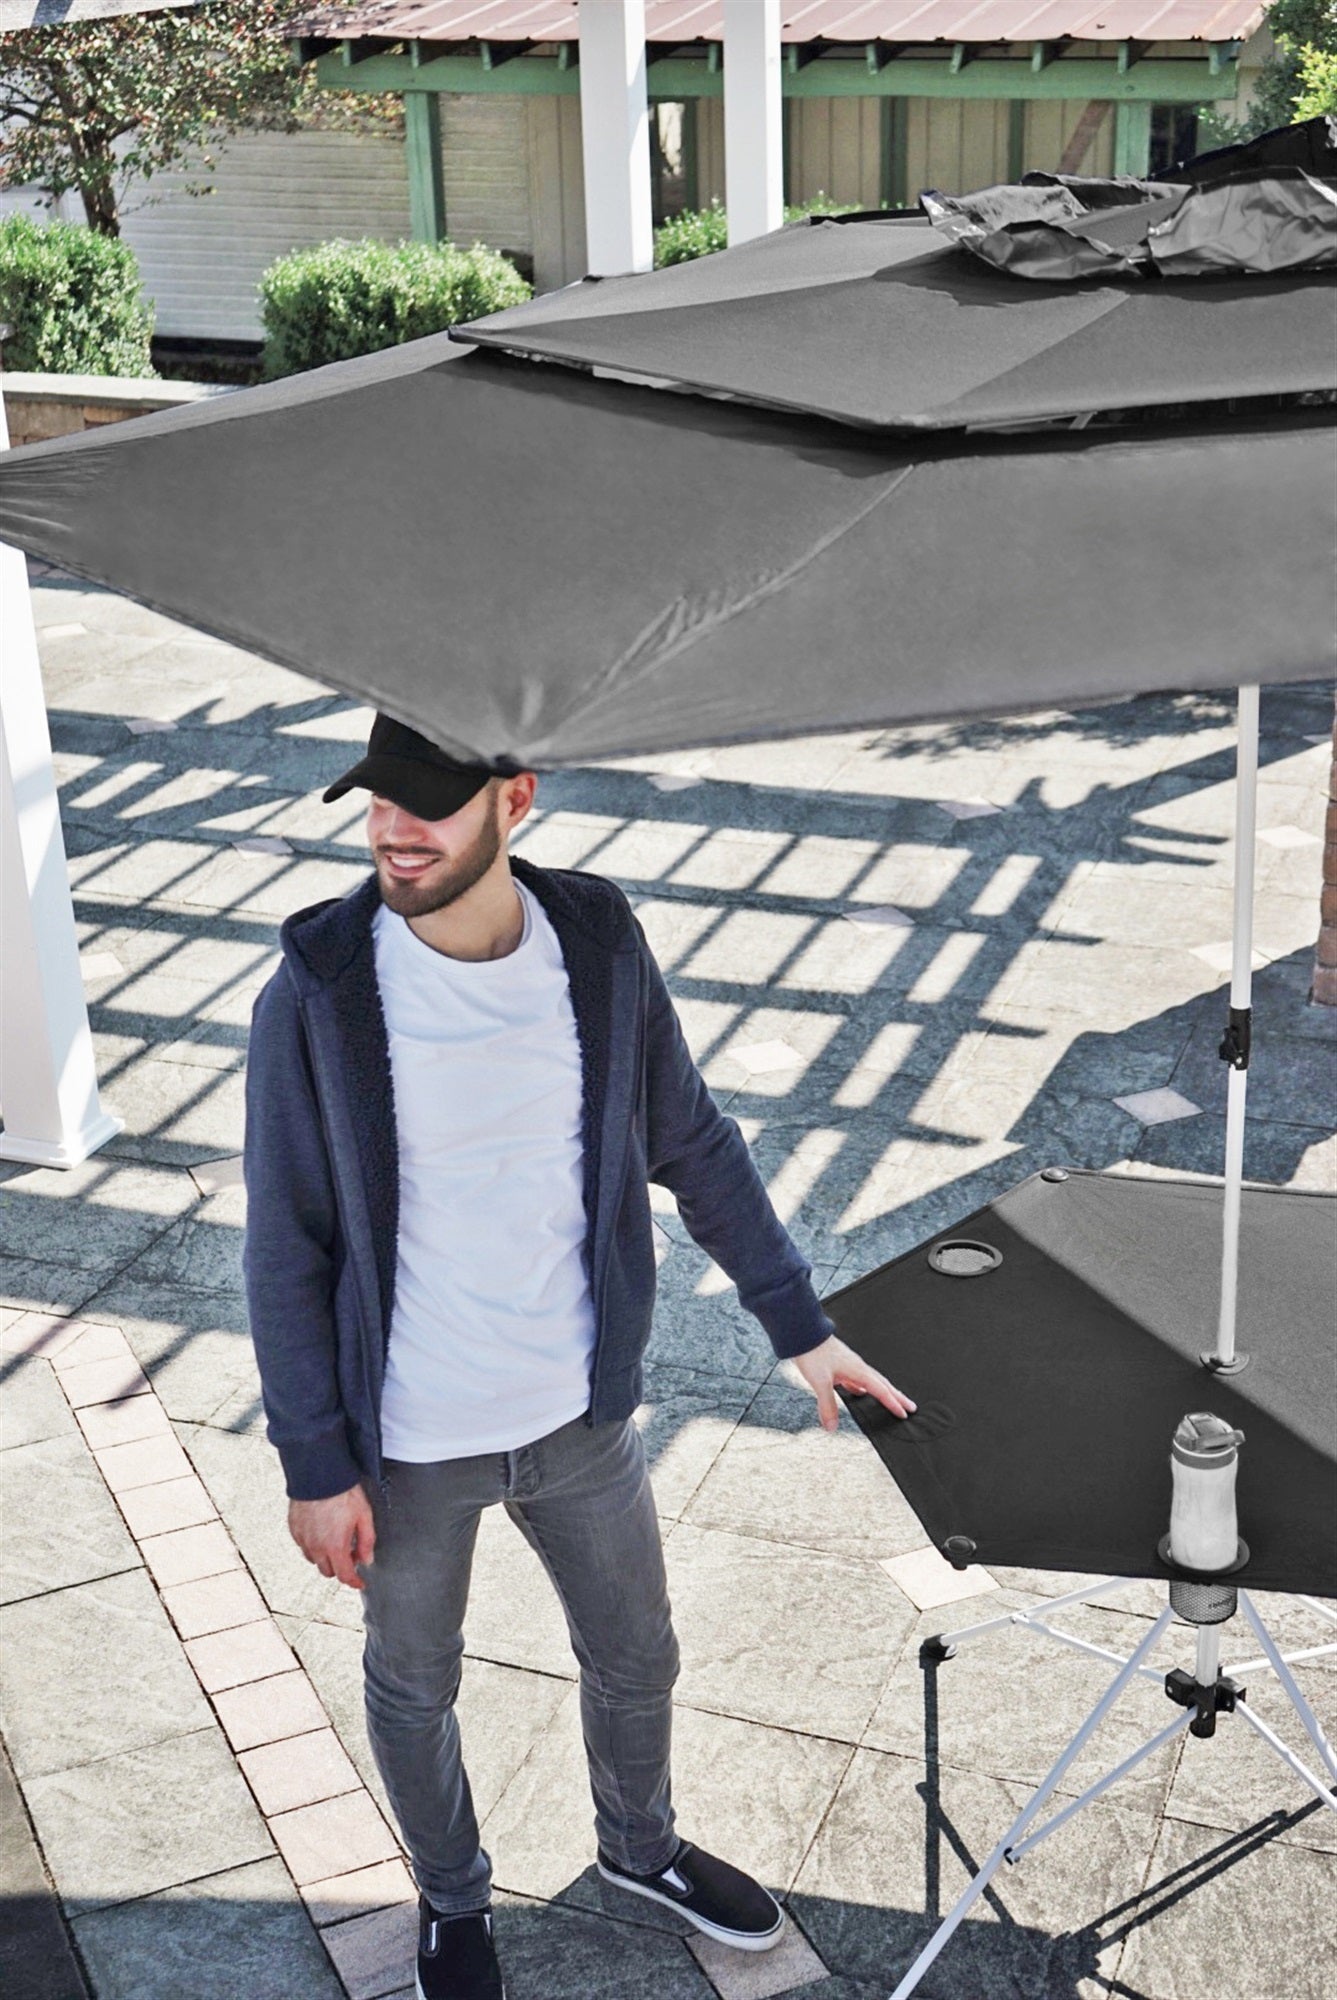 Zenithen Limited Black Roof Outdoor Folding Transportable Canopy Table With Cup Holders, Black